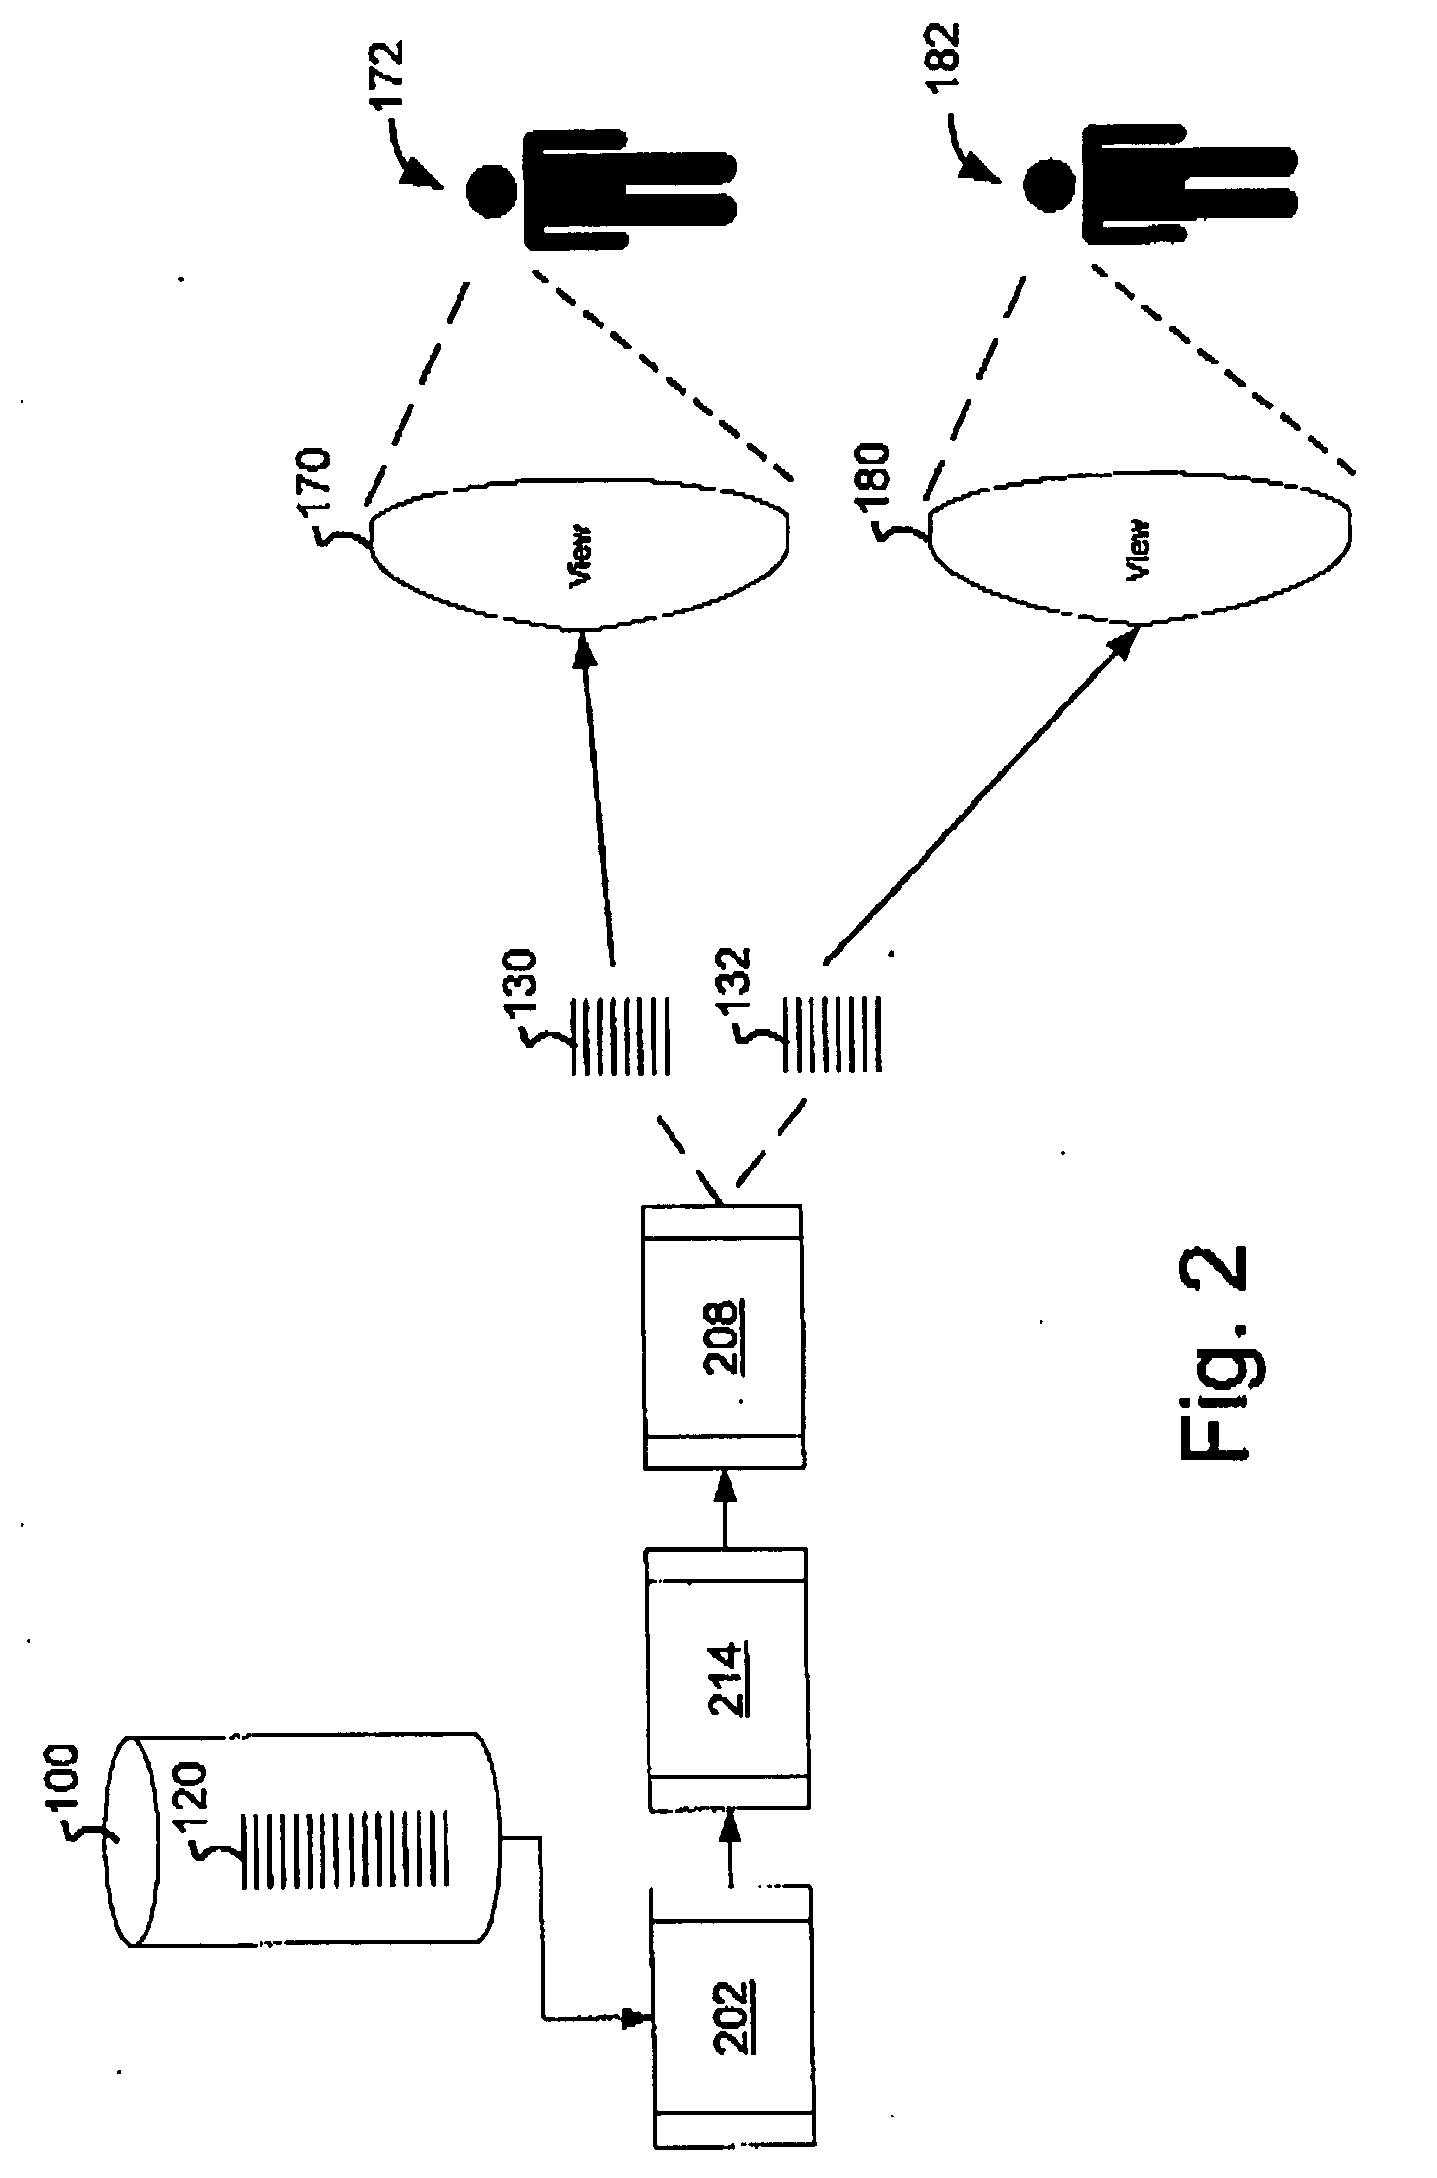 Timeshared electronic catalog system and method